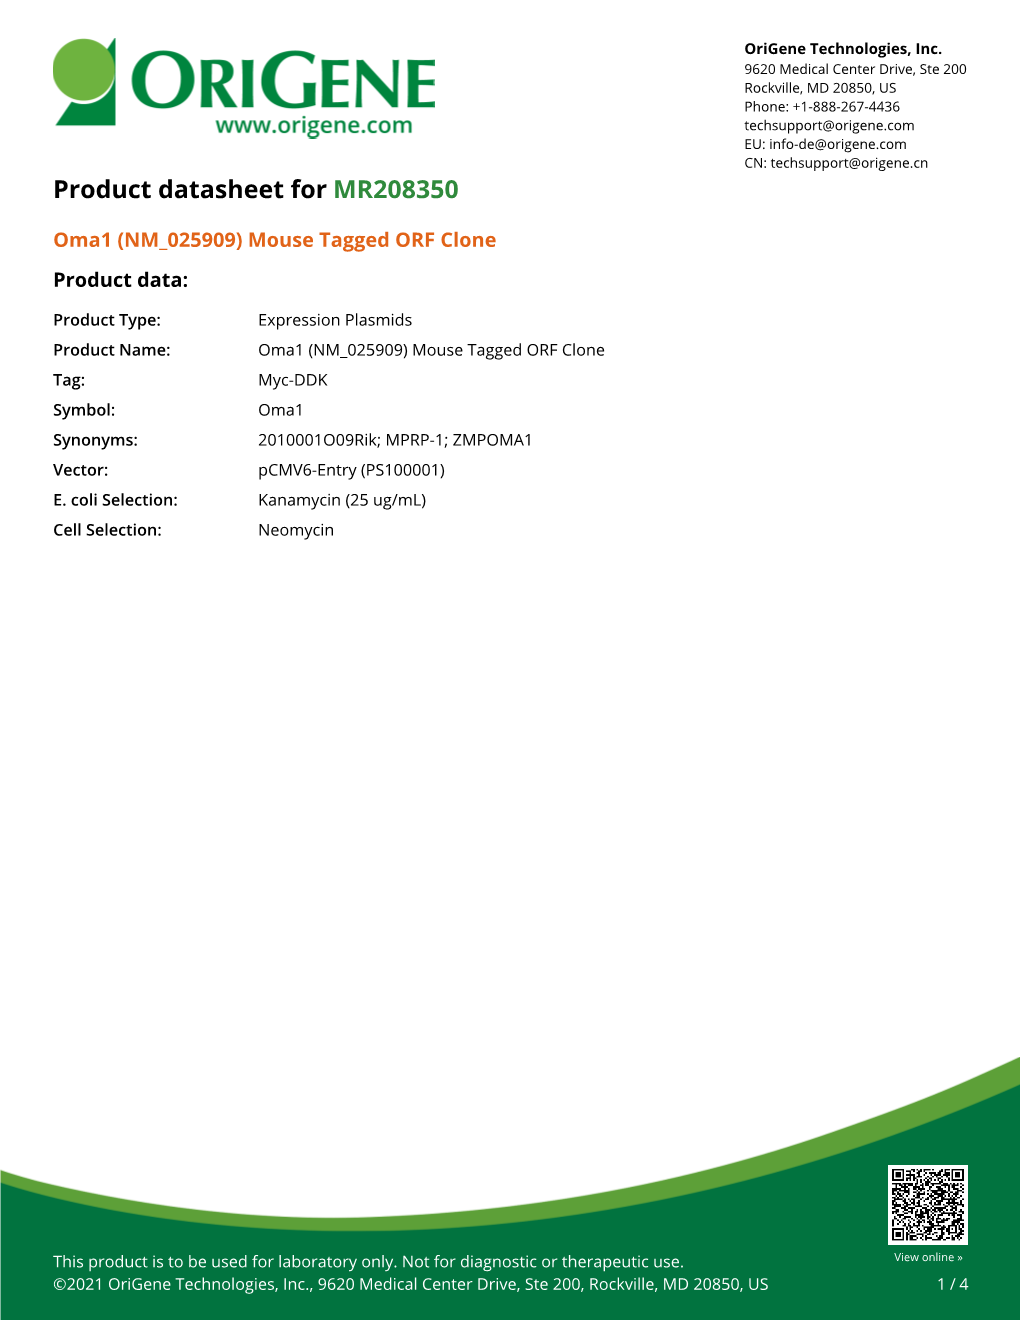 Oma1 (NM 025909) Mouse Tagged ORF Clone Product Data